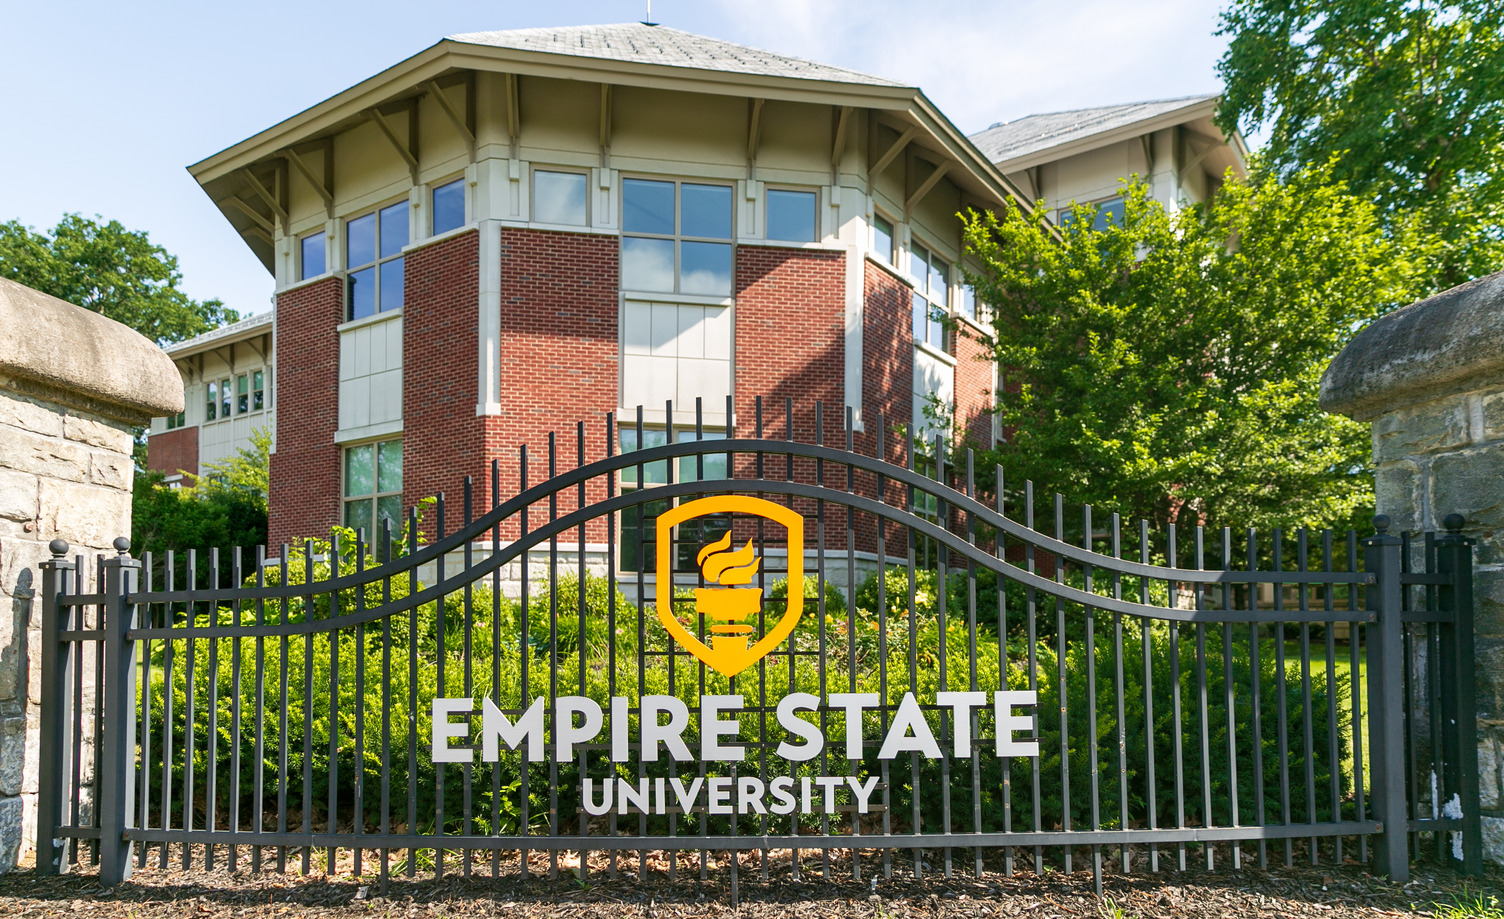 New Pathway to a Bachelor's Degree at SUNY Empire